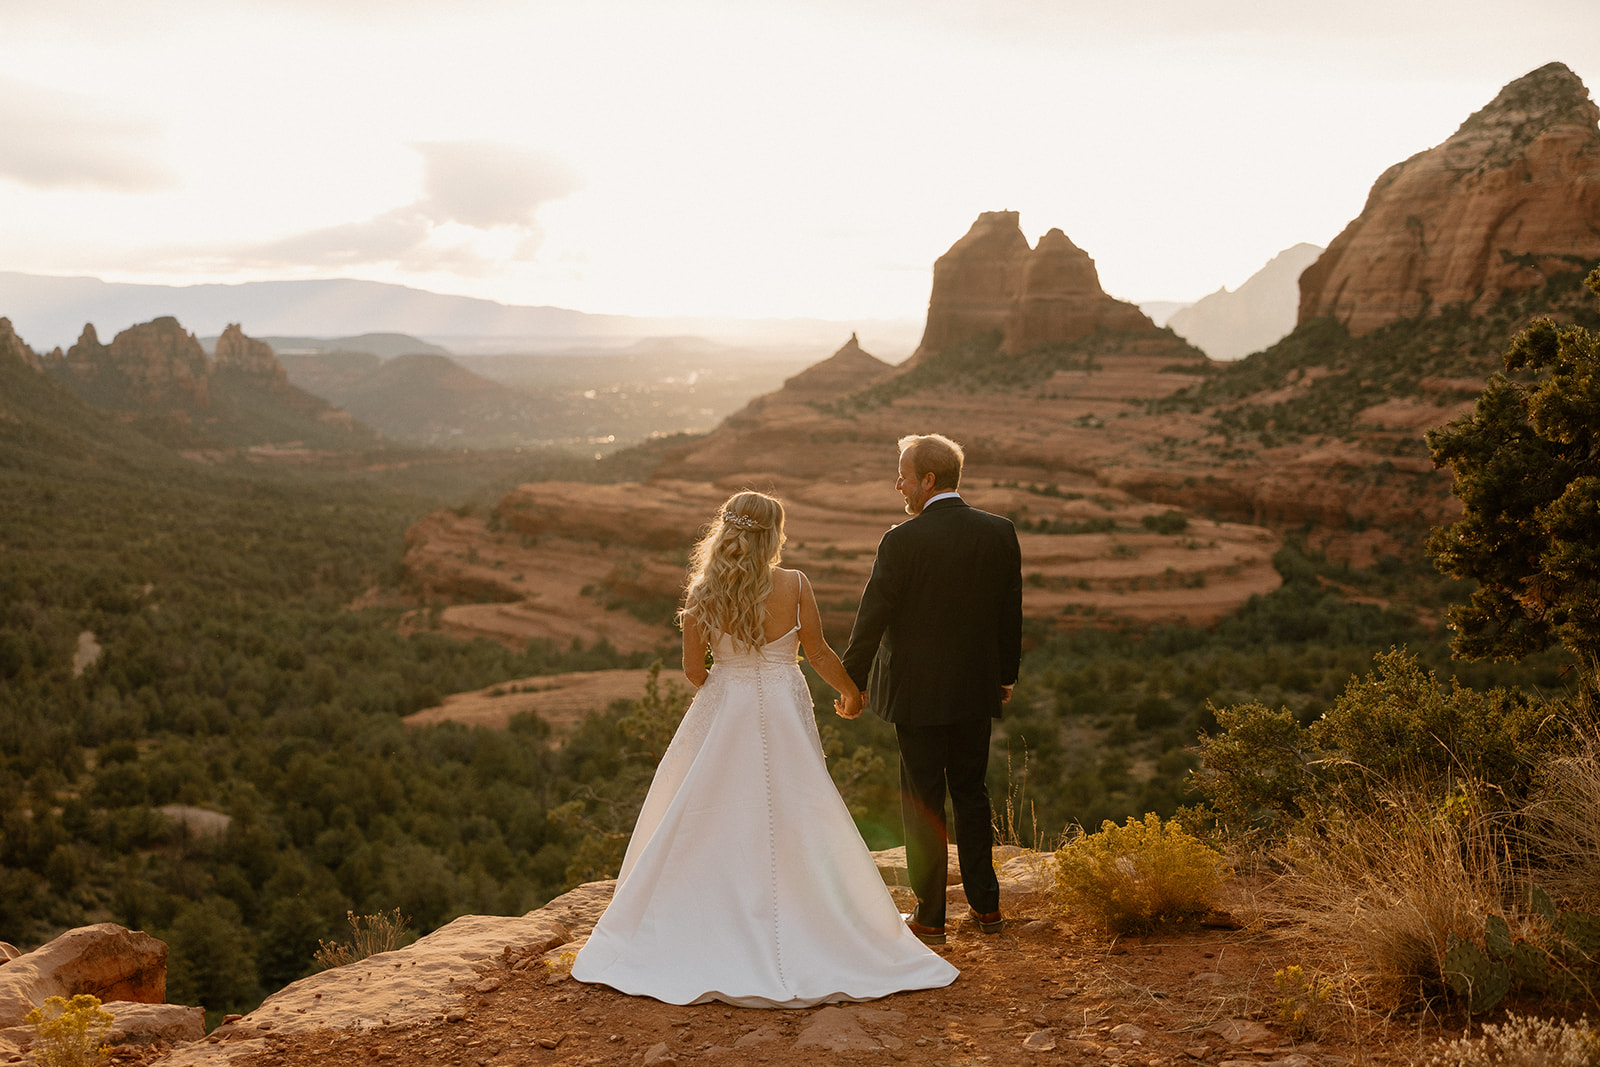 beautiful bride and groom pose with the stunning Arizona nature in the background!